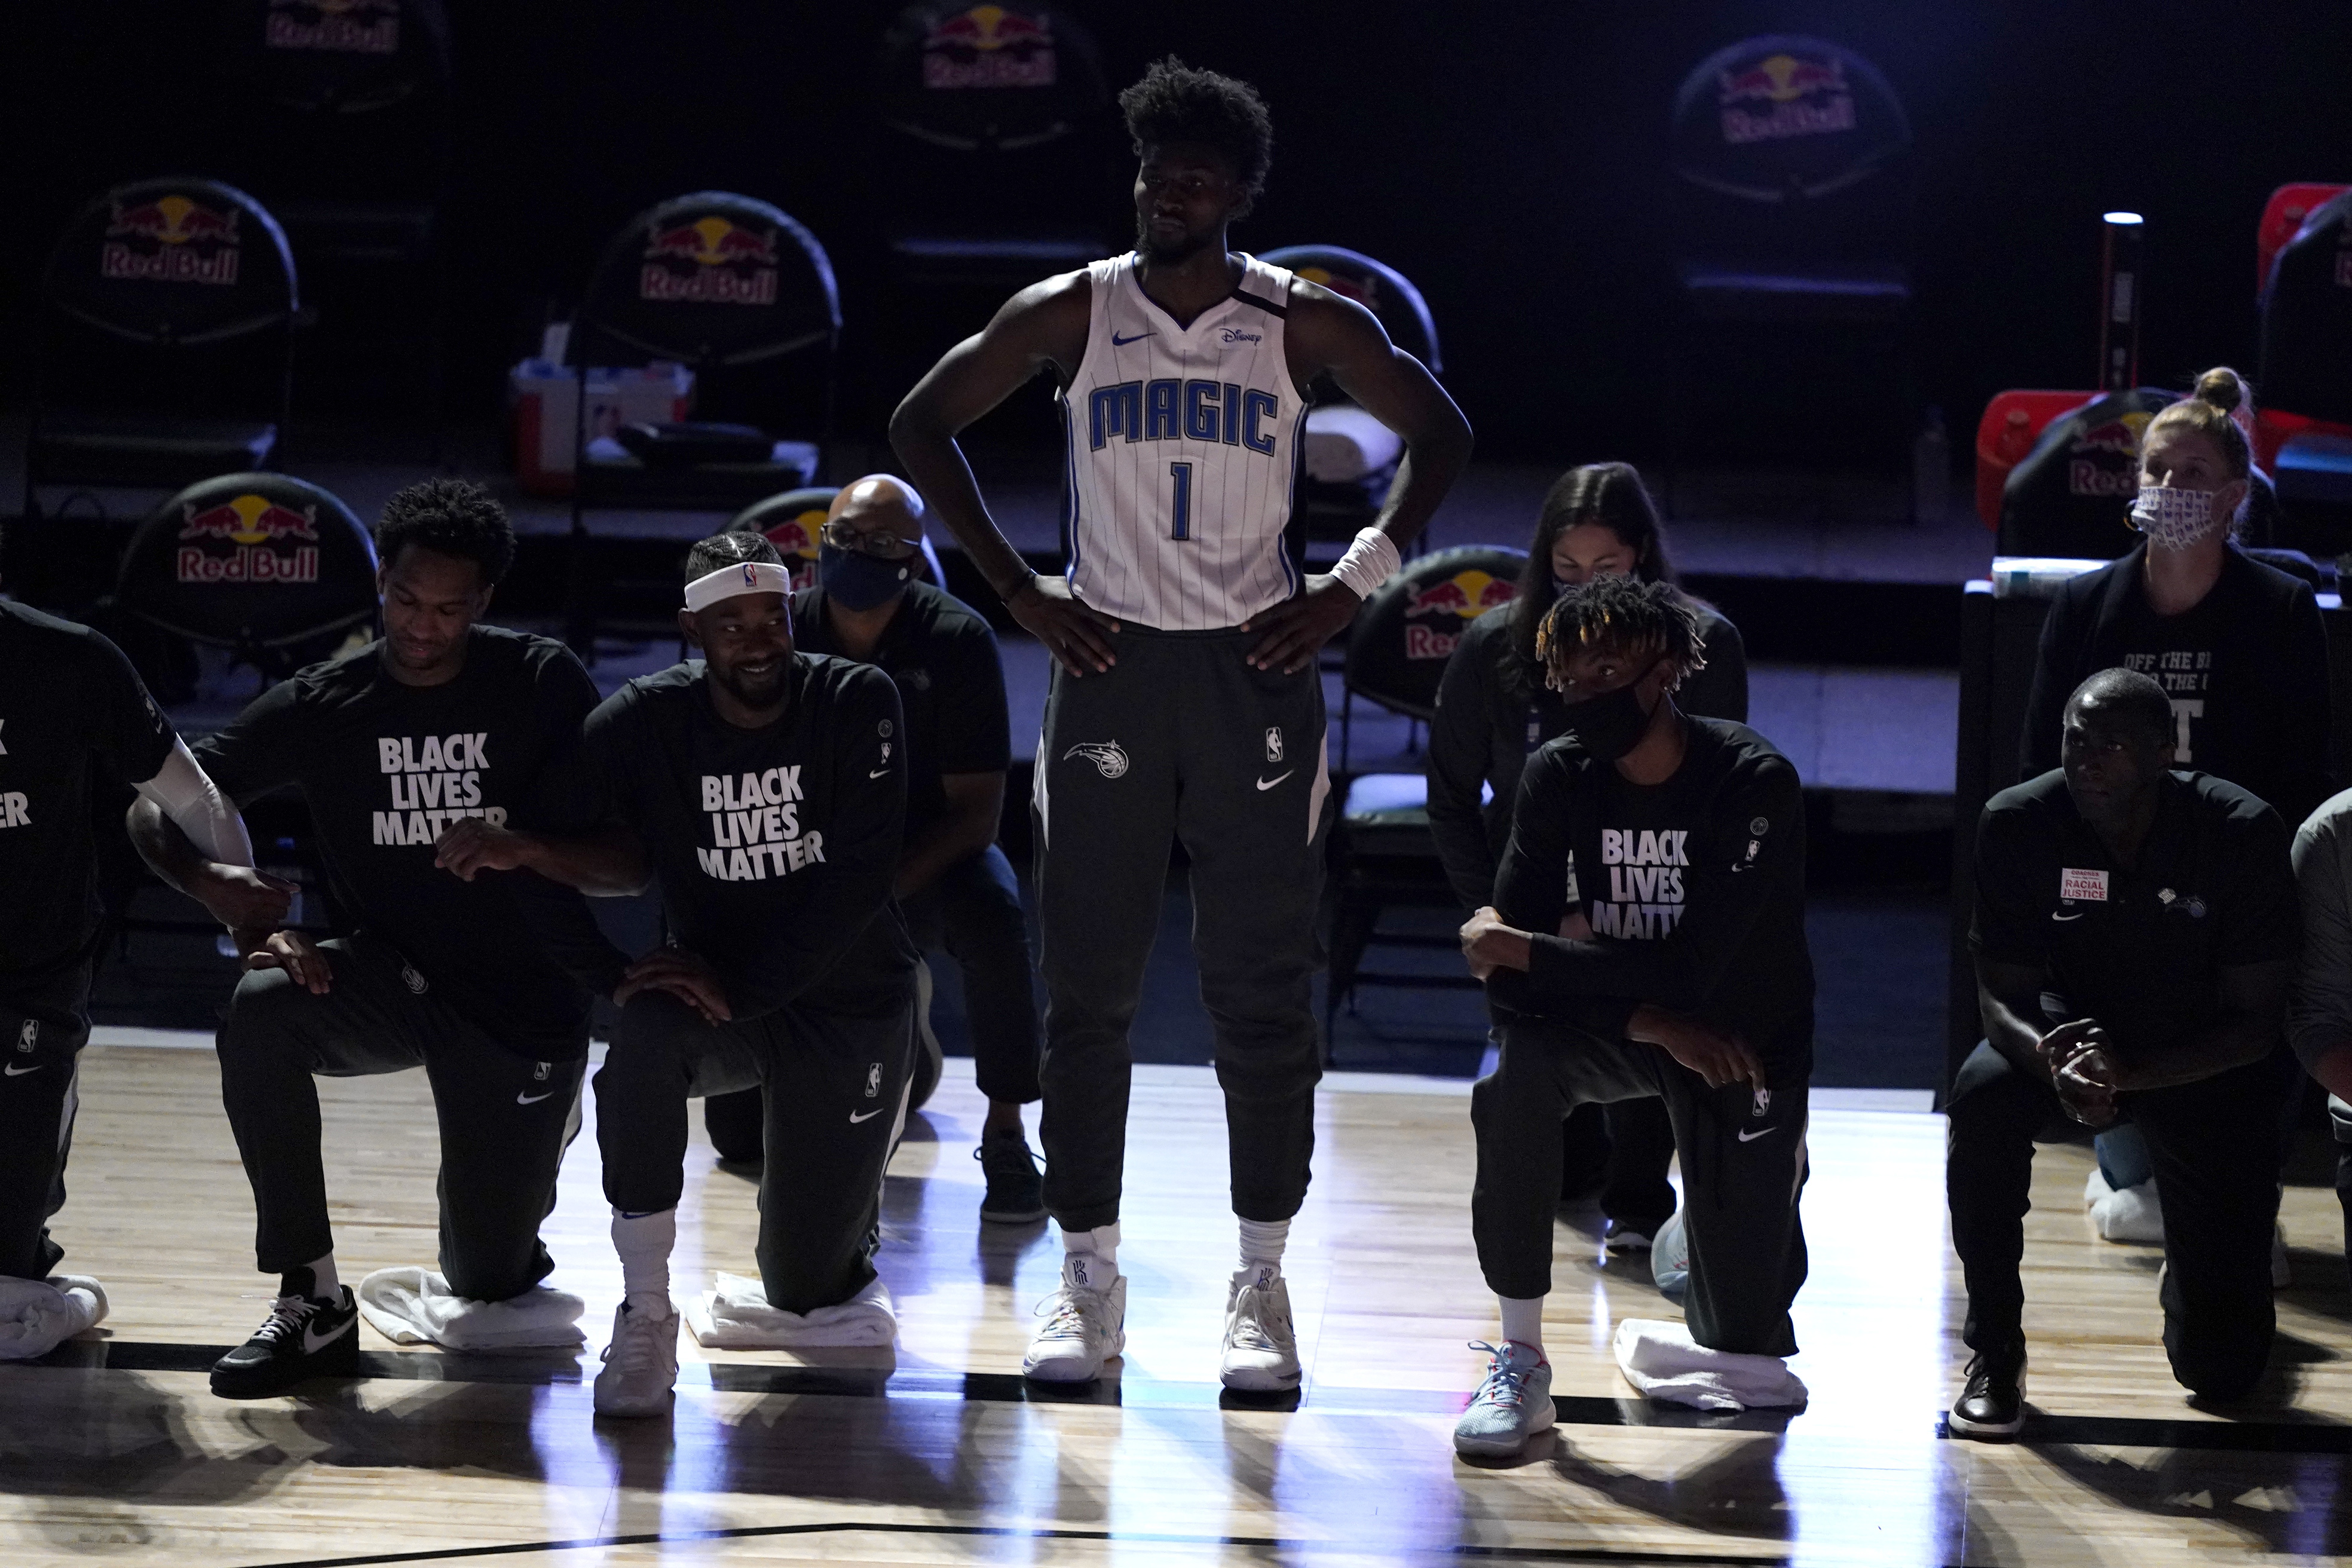 Jersey Sales Soar For Orlando Magic's Jonathan Isaac After He Stood Alone  For National Anthem